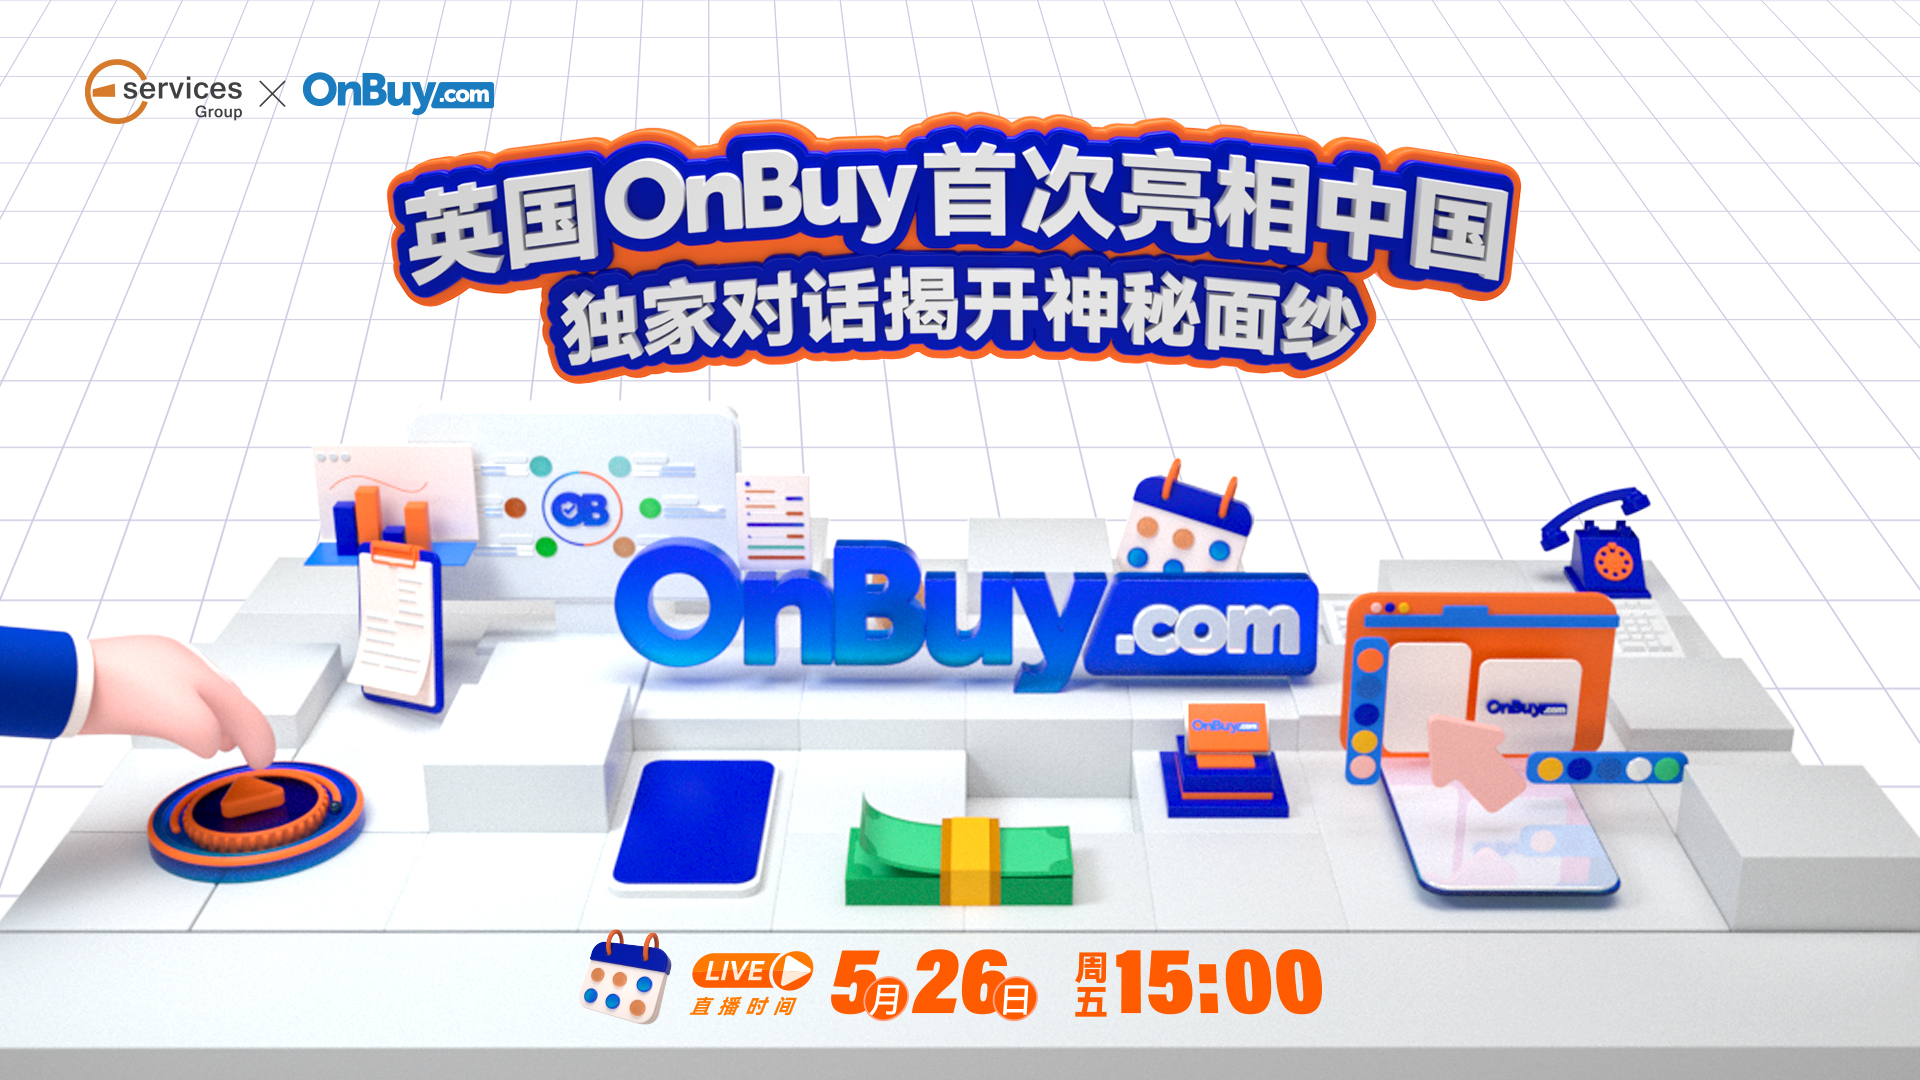 onbuy官方直播